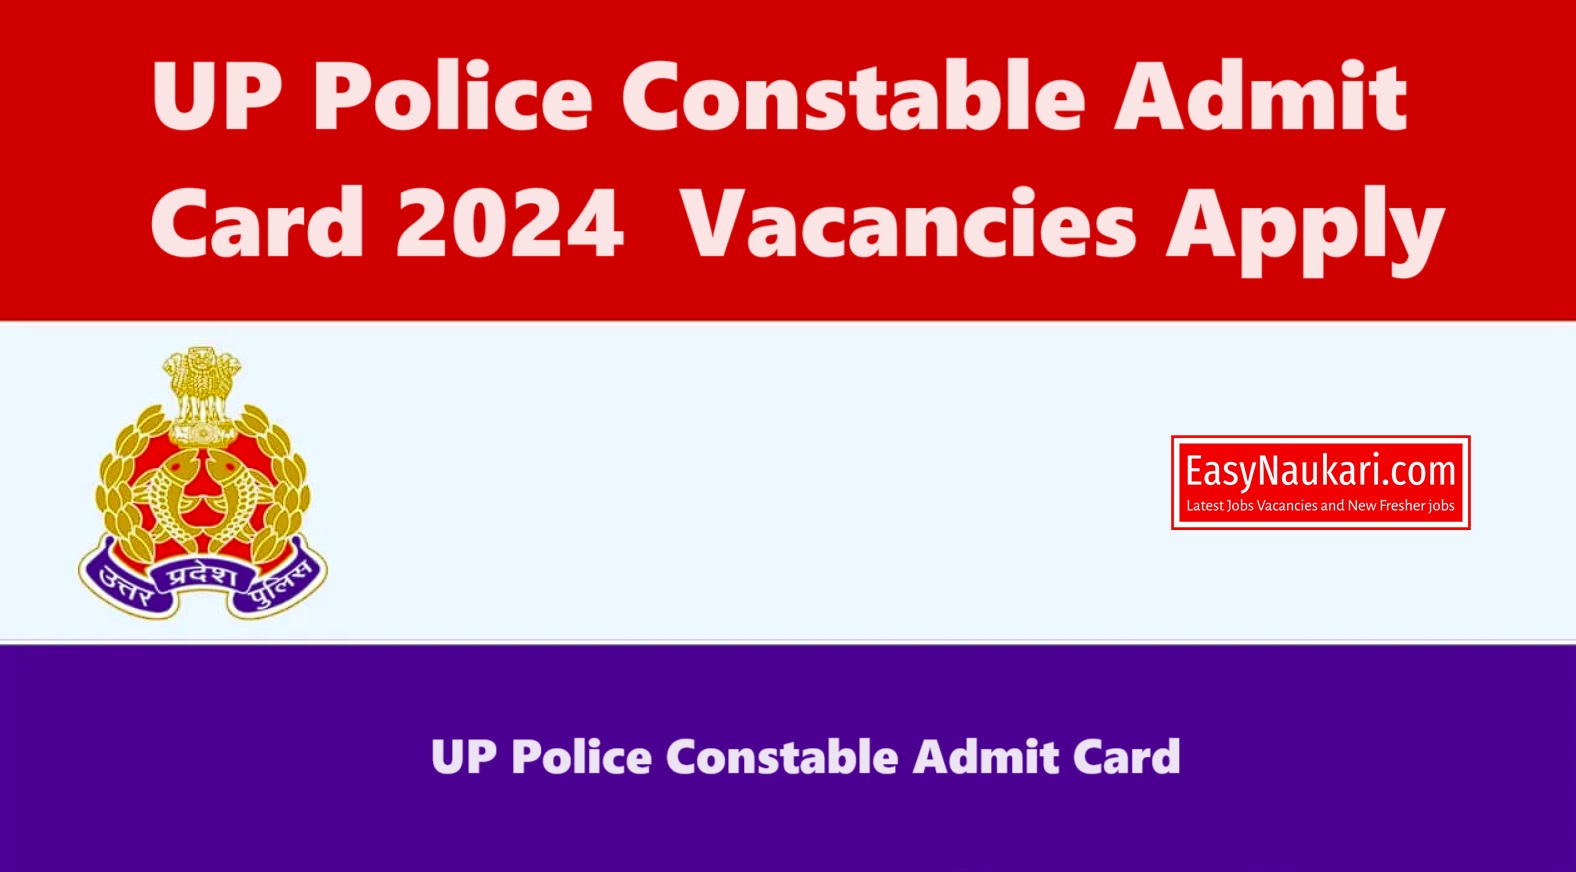 Up Police Constable Admit Card Download 2024